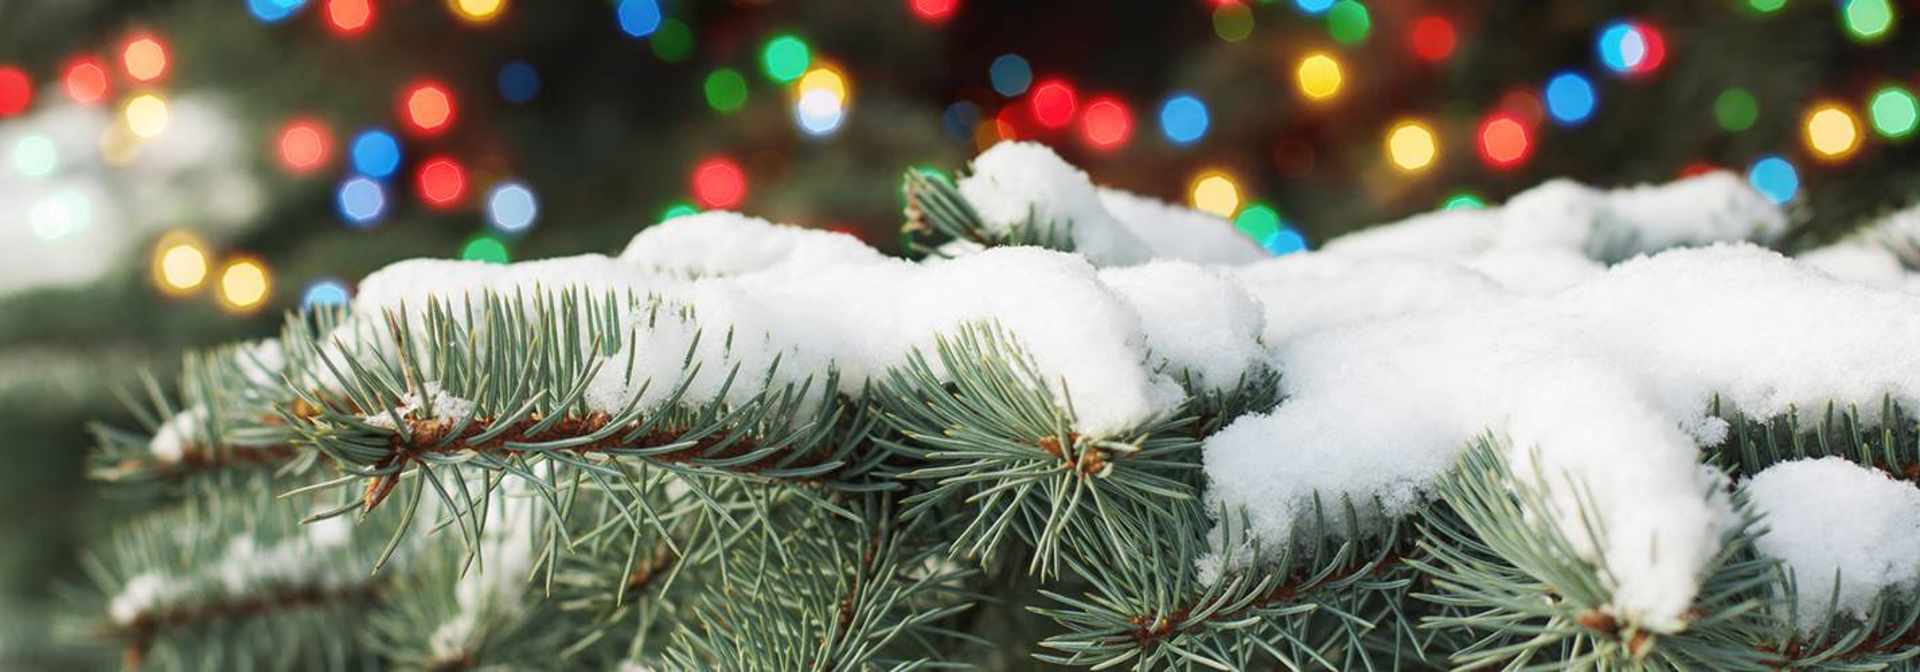 How To Wrap Outdoor Trees With Christmas Lights